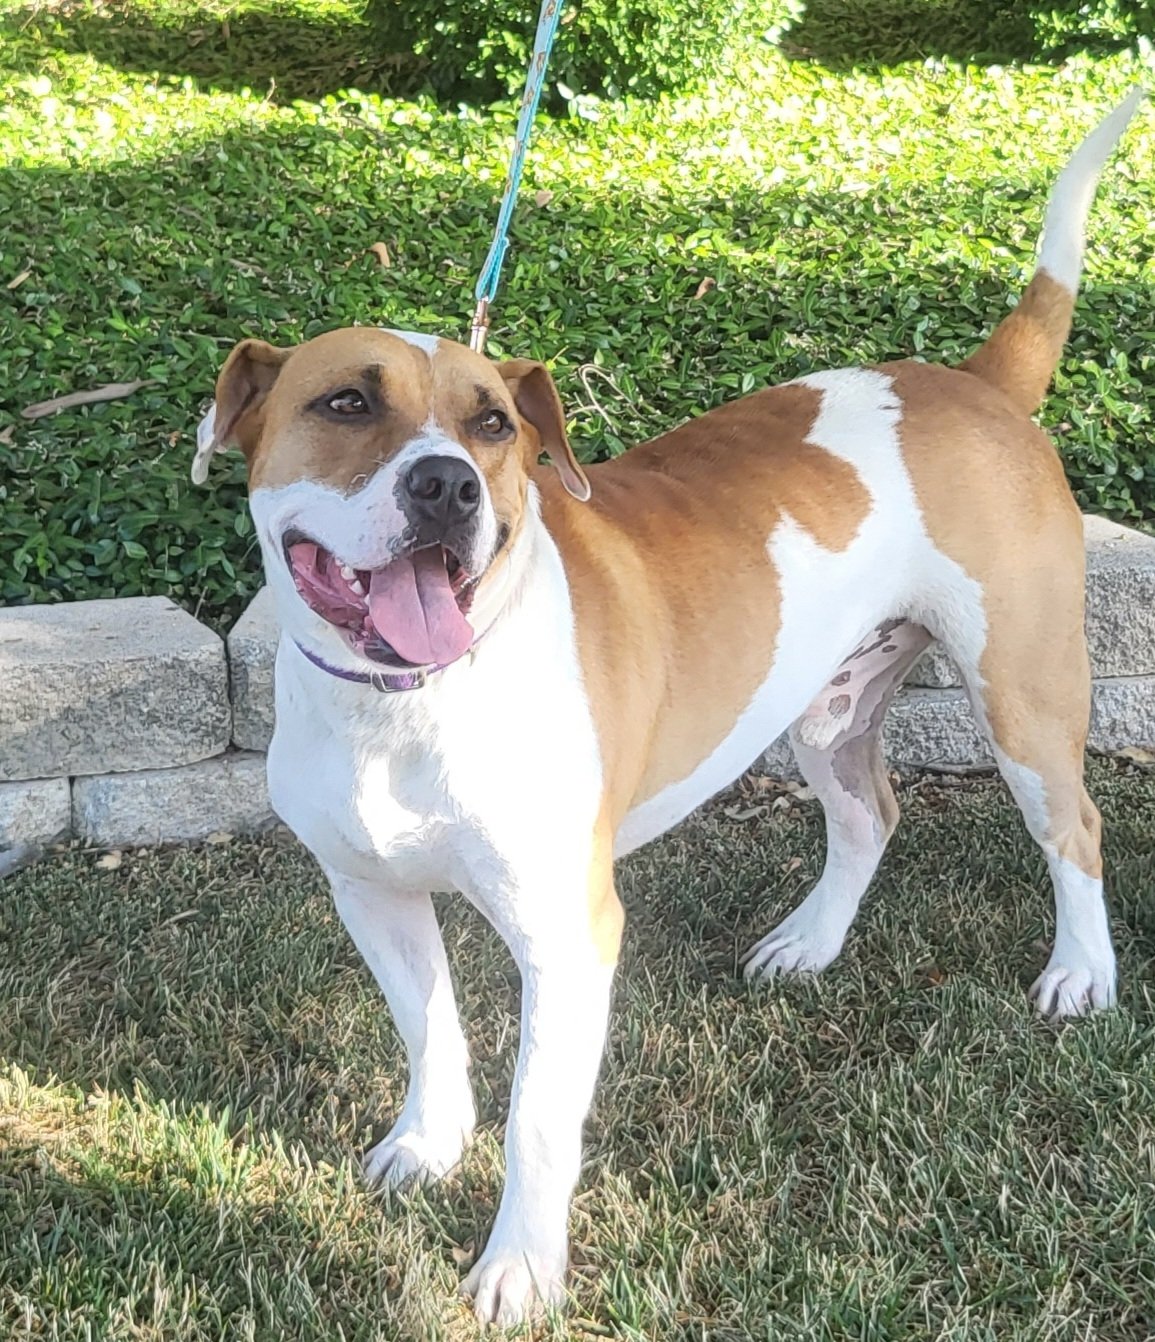 Sinatra is a tan and white mix breed, about 3 years old; 55 lbs; good with dogs.; well behaved. Email Deborah Haller, volunteer rescue coordinator, at dshrescuedogs15@gmail.com for more information about Sinatra.